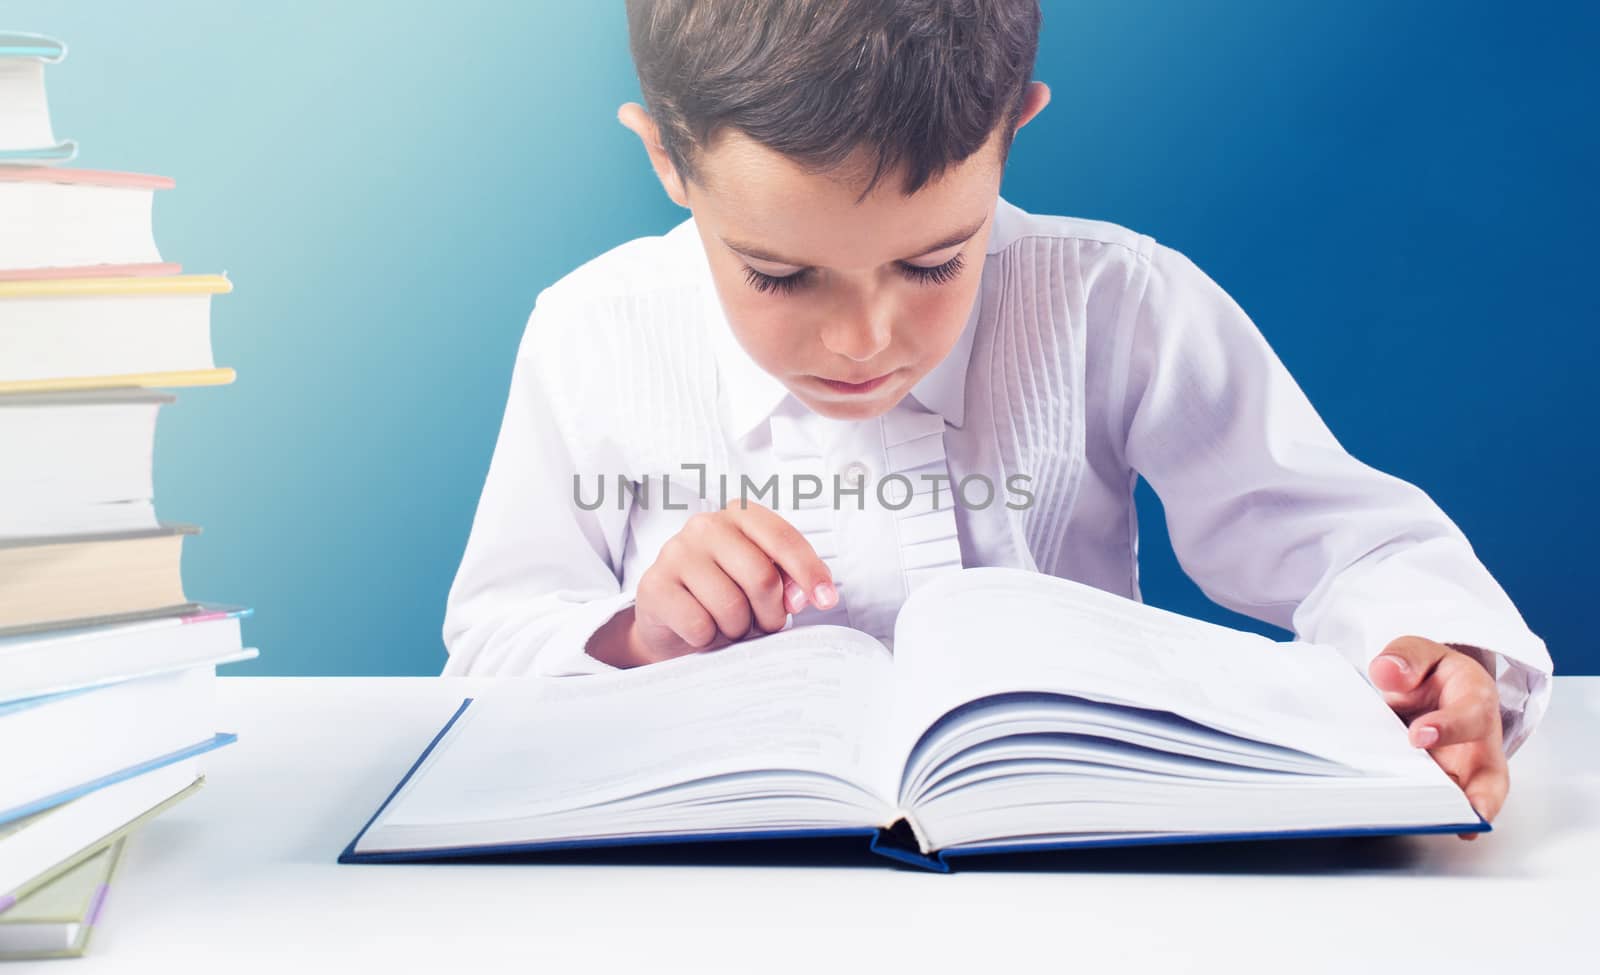 Сute boy reading book at the table, blue background